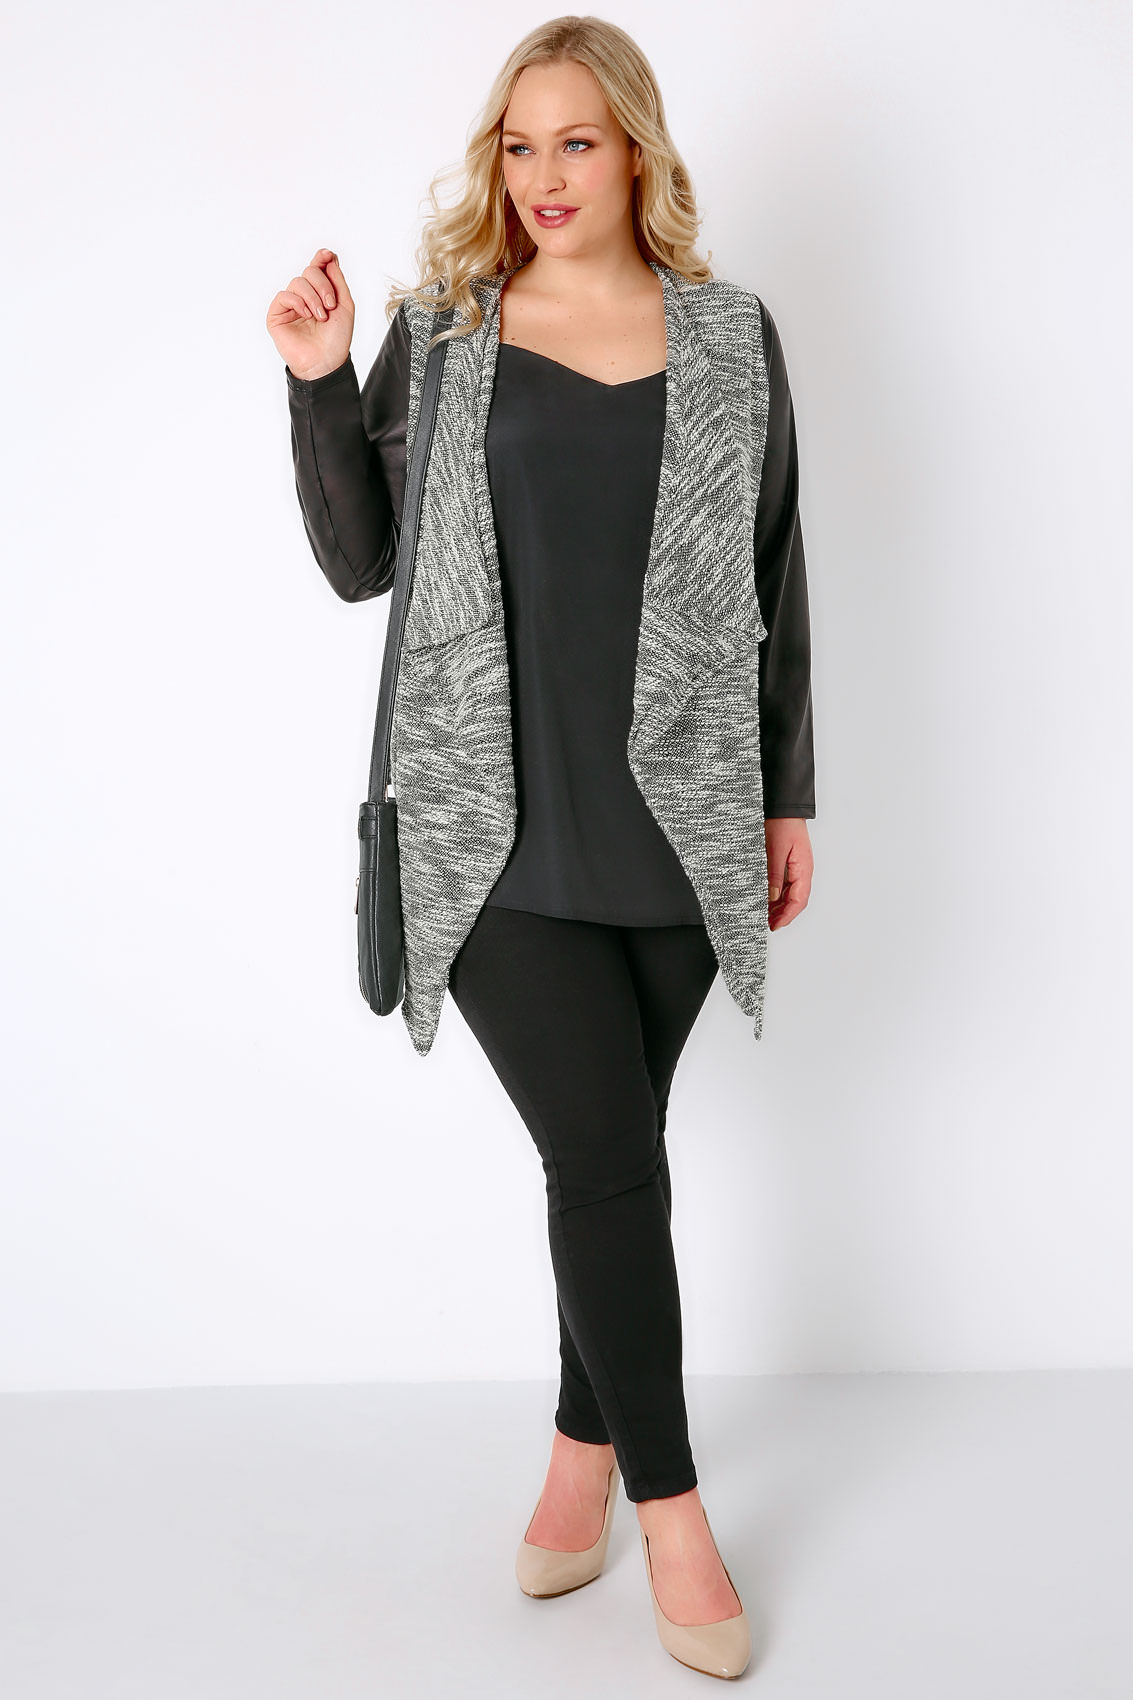 Black & White Lightweight Textured Jacket With PU Sleeves Plus size 16